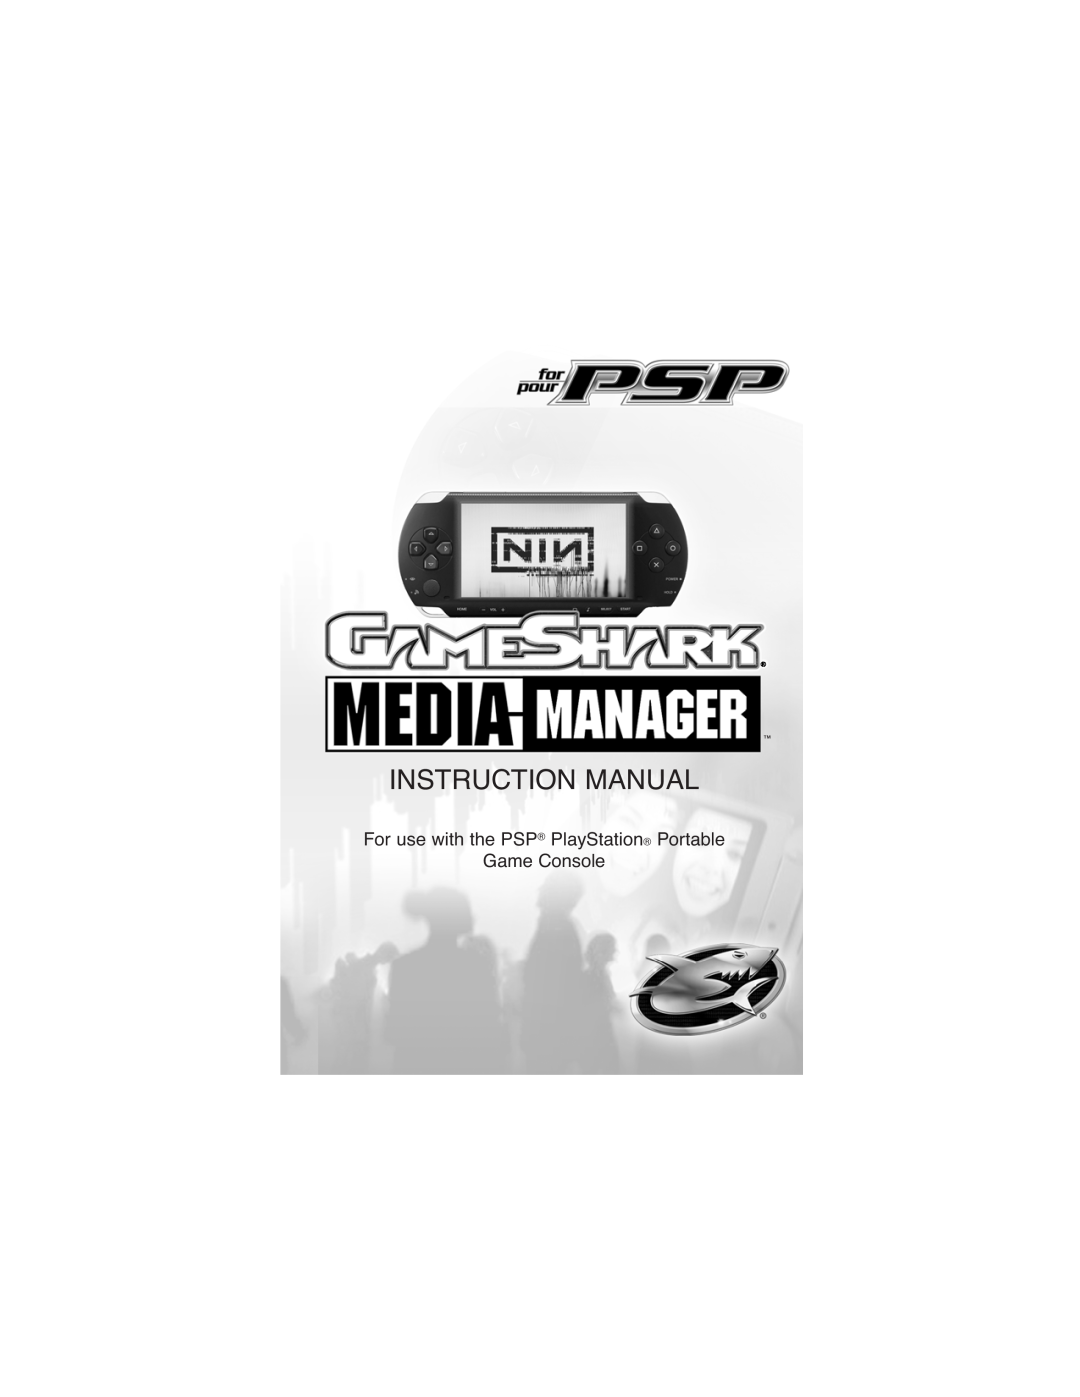 Apple Media Manager for PSP instruction manual Instruction Manual, For use with the PSP PlayStation Portable Game Console 